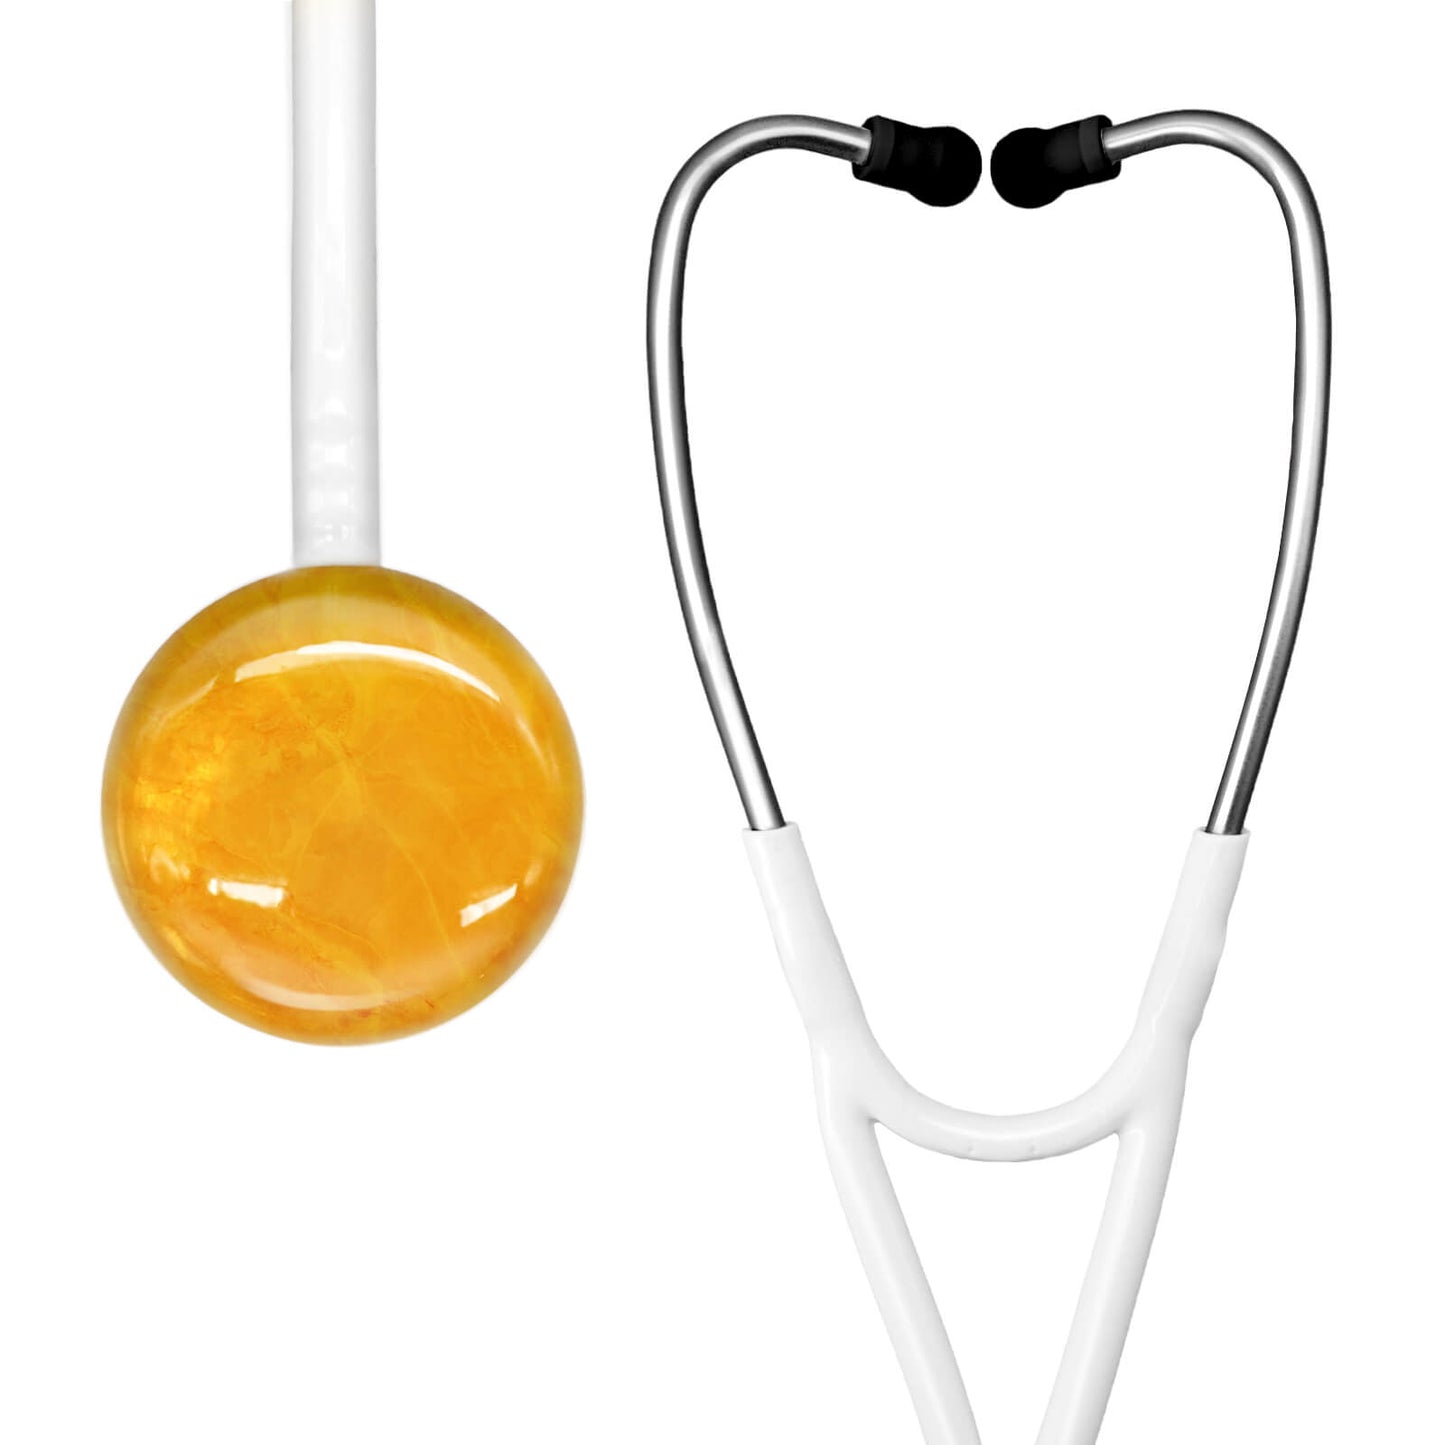 FriCARE Cardiology Stethoscope Single Head Agate (White Chestpiece, White Tube)